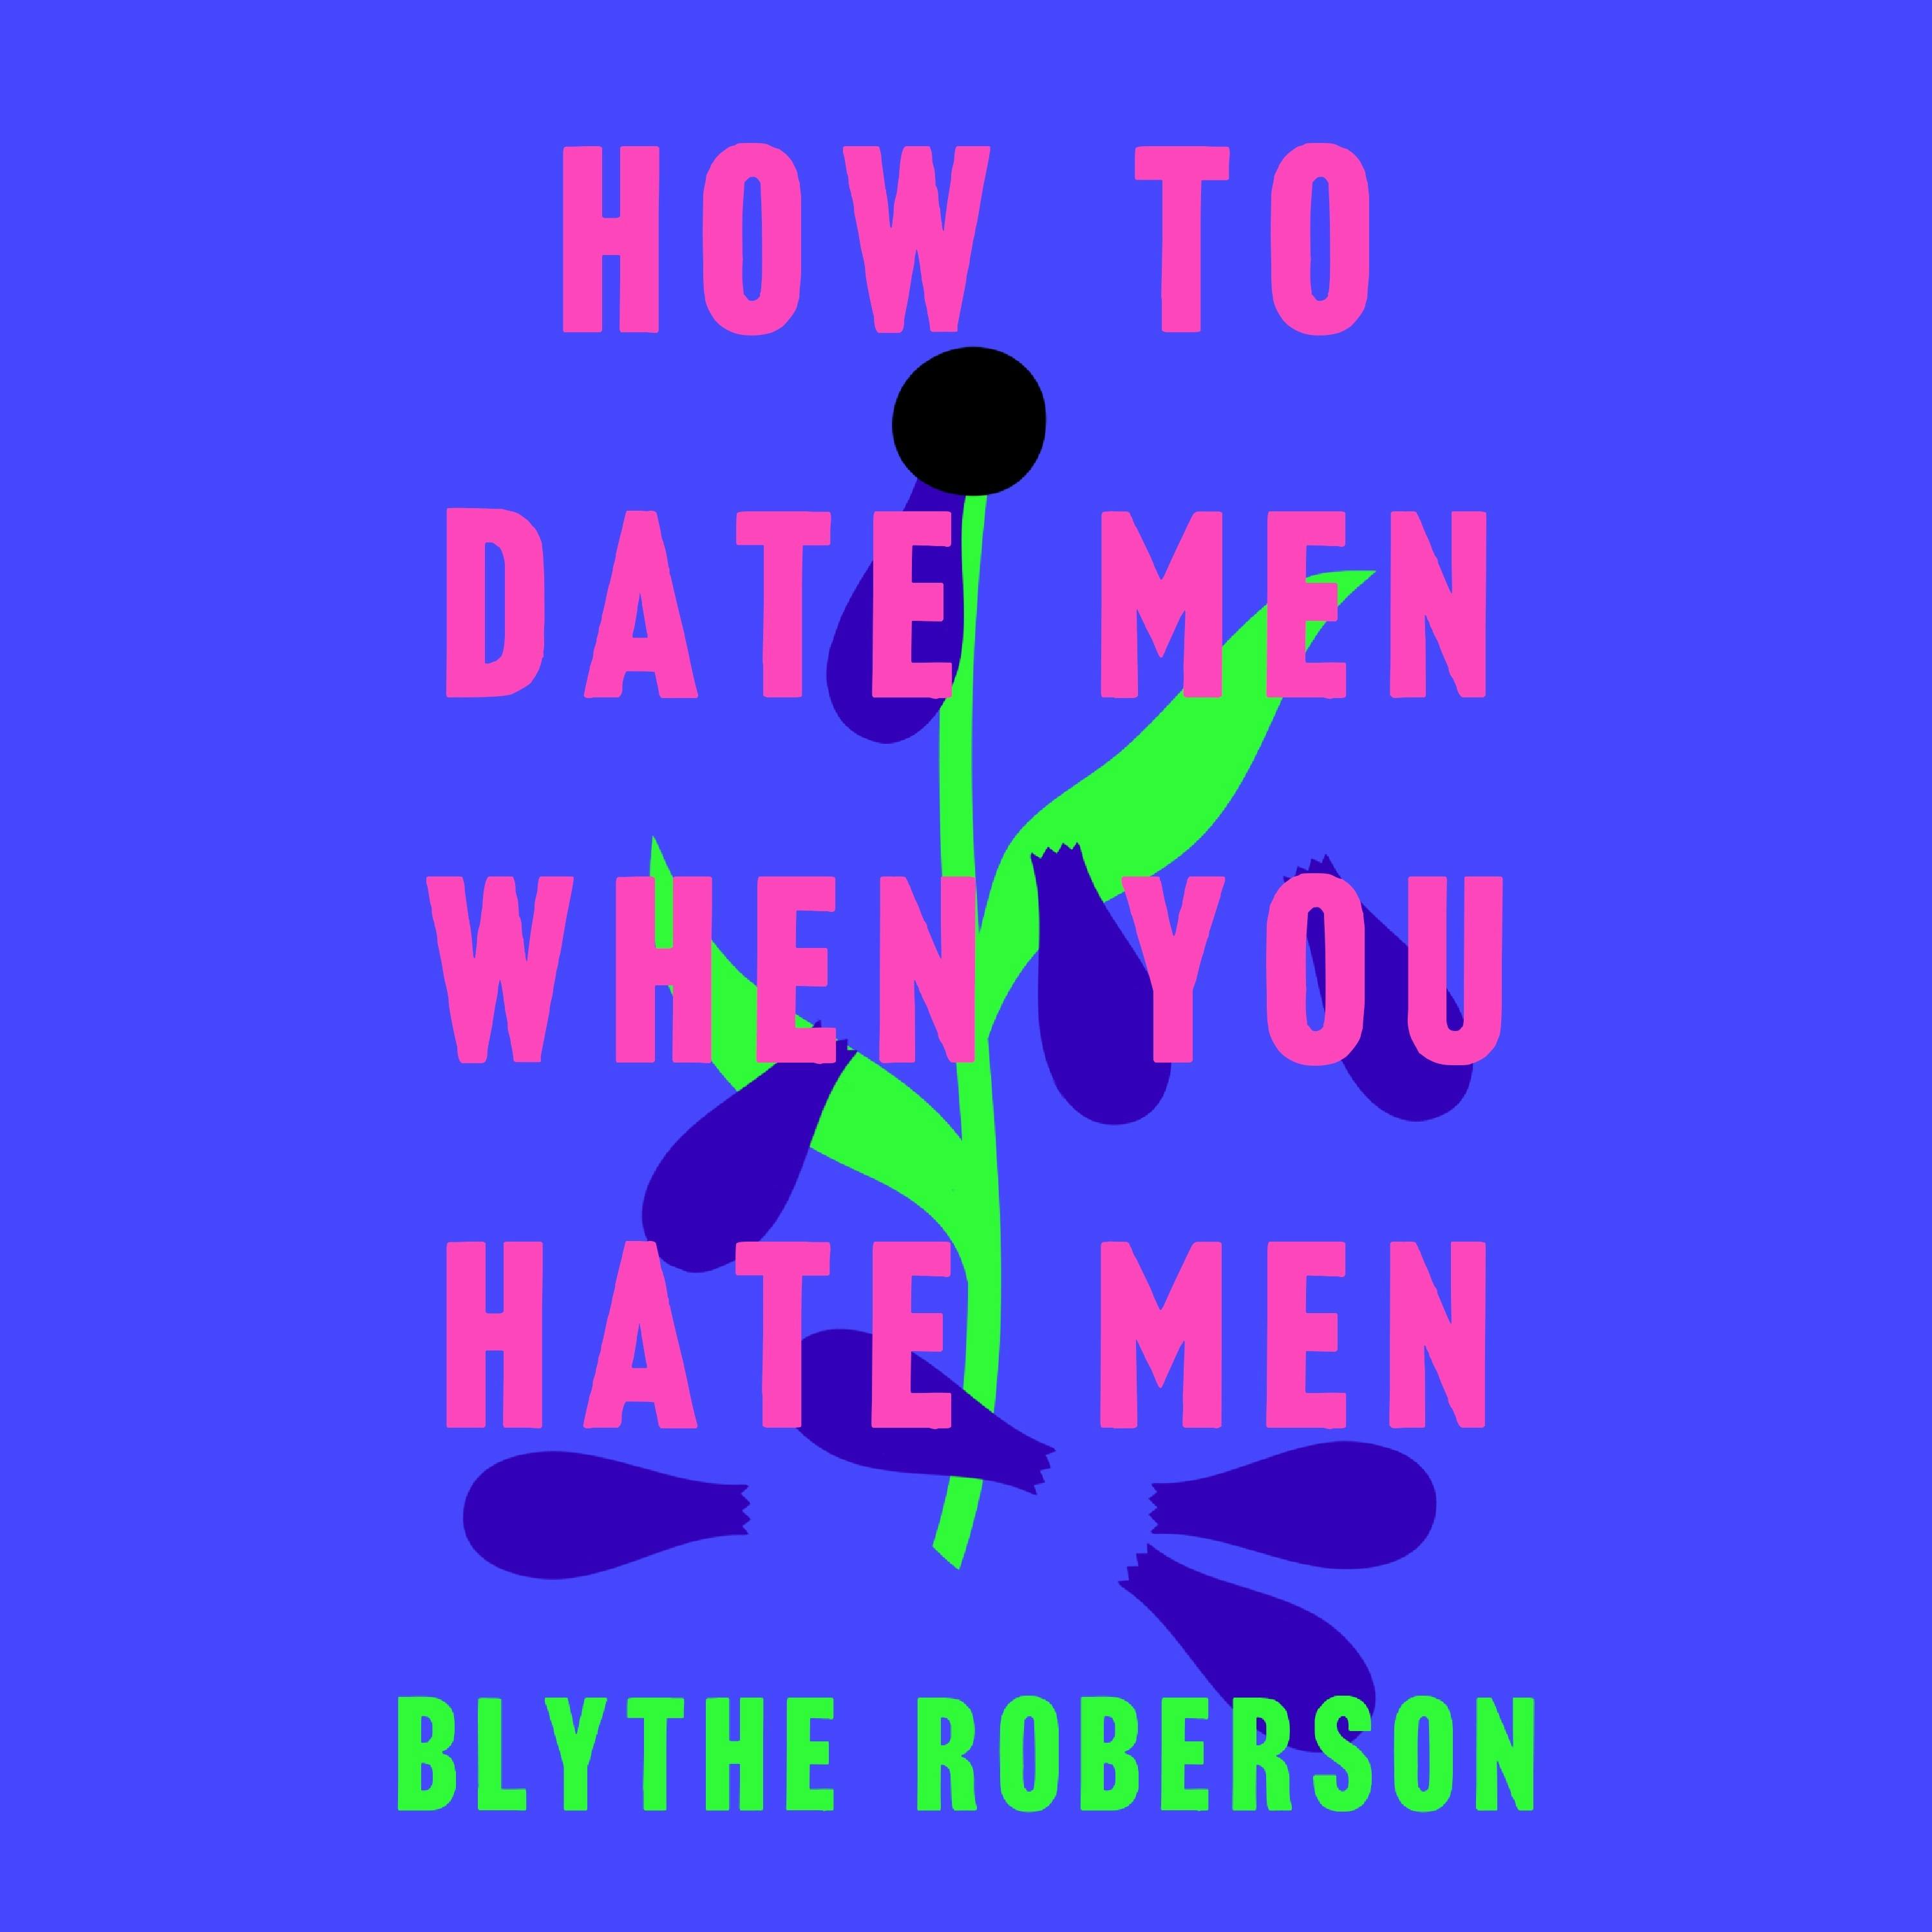 I hate men. How to Date men when you hate men. Hate men. How Date with man when you hate man.